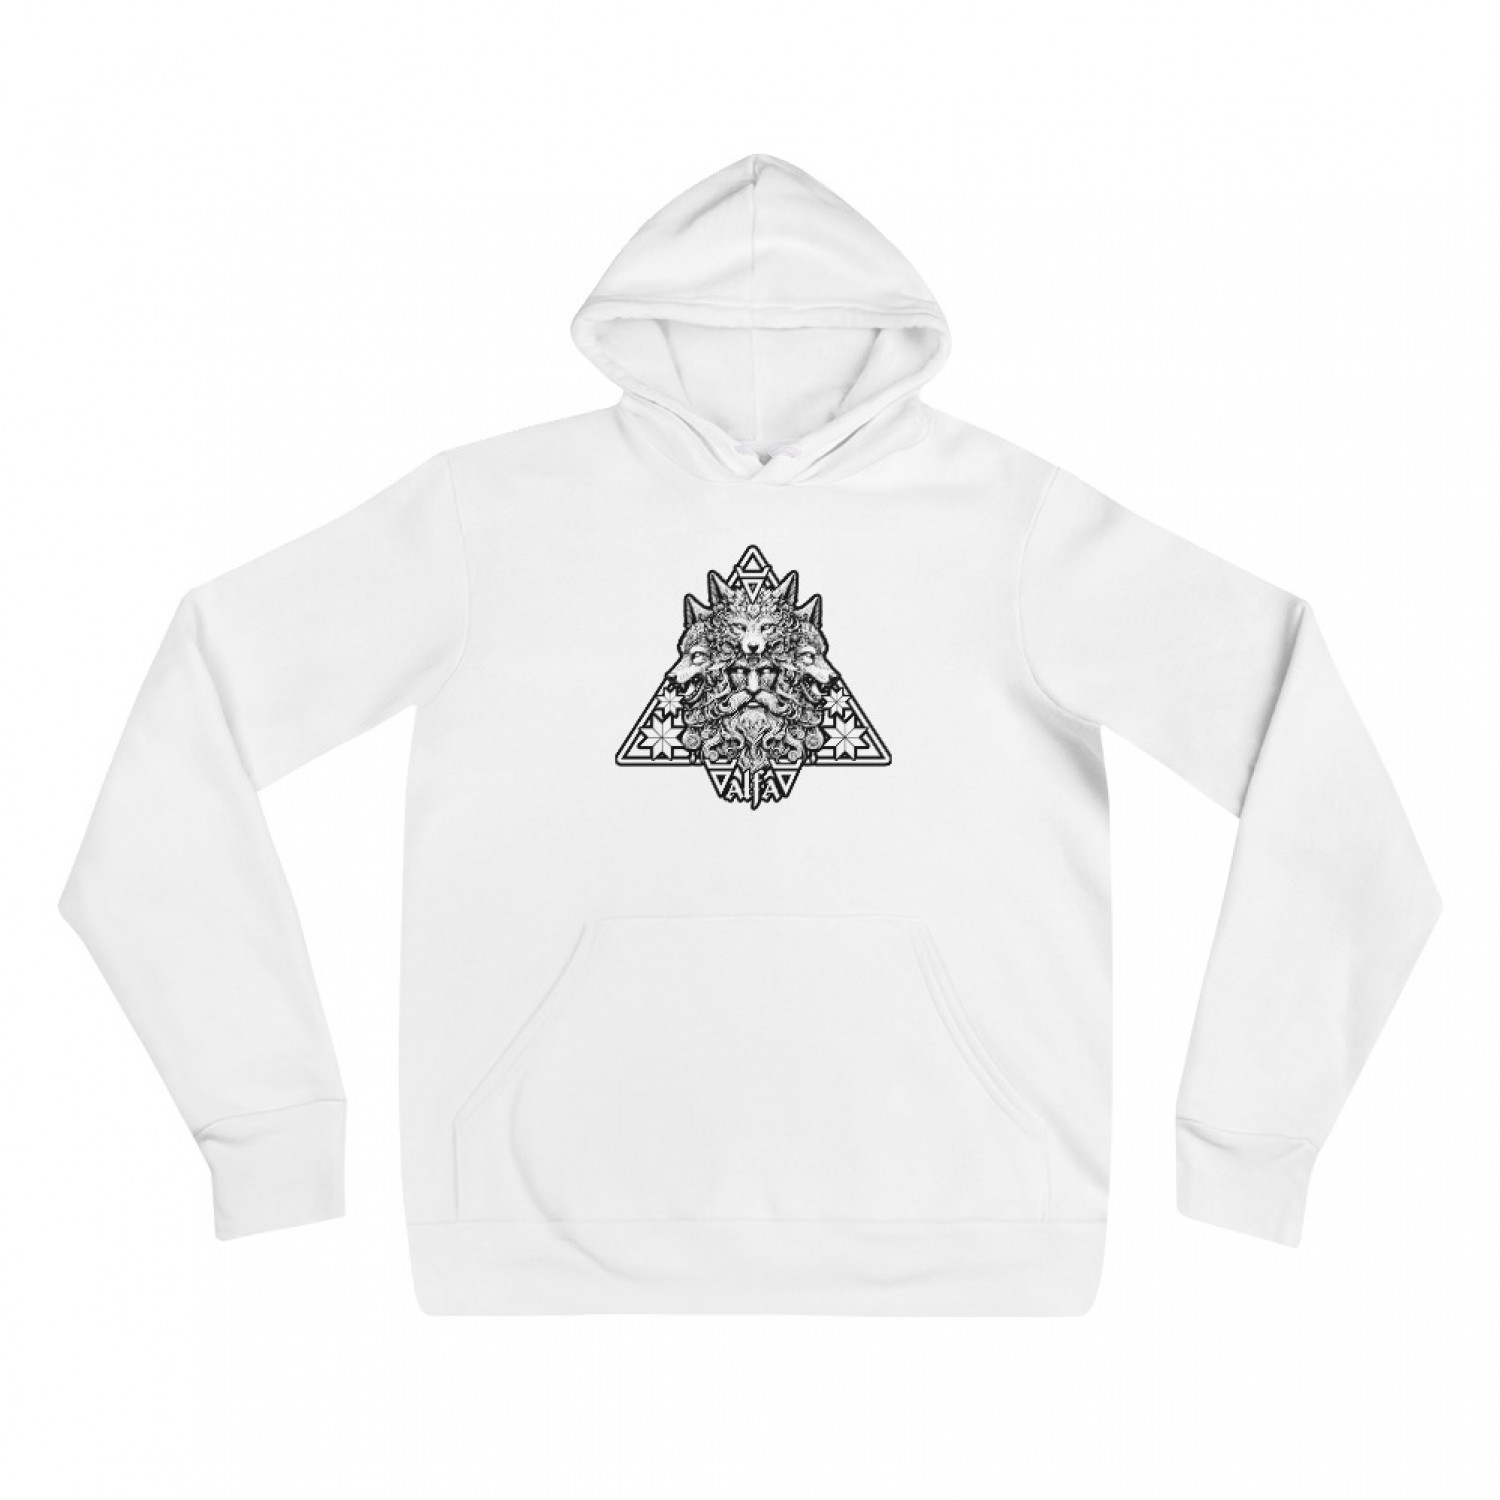 Buy a warm hoodie with the god Veles